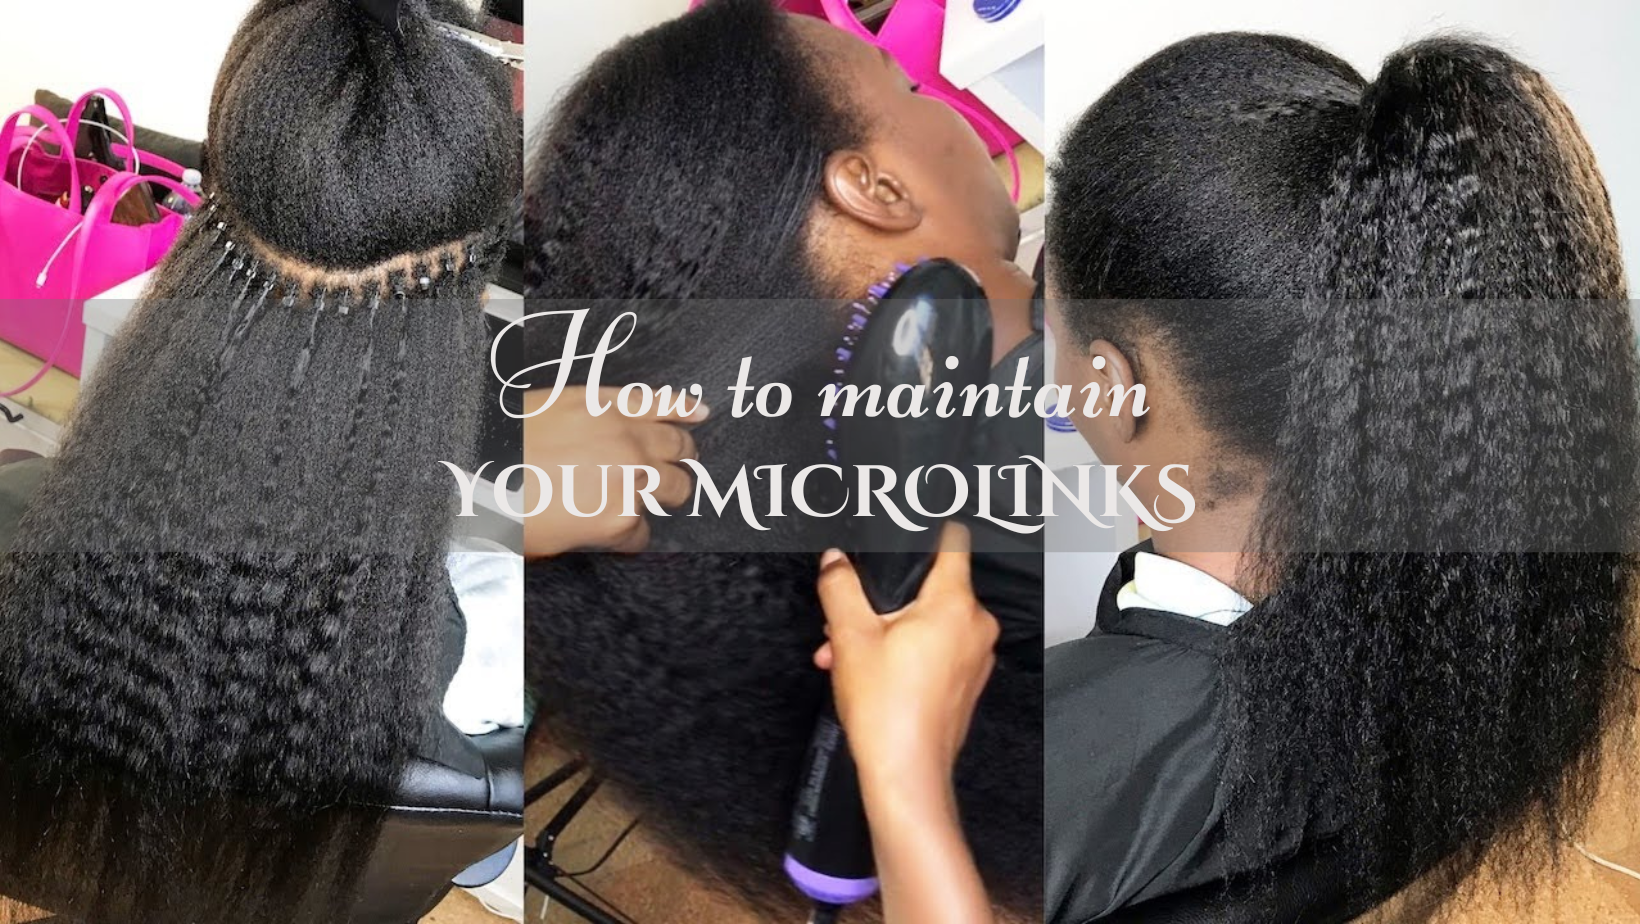 Microlinks on Black Hair, Everything You Need to Know